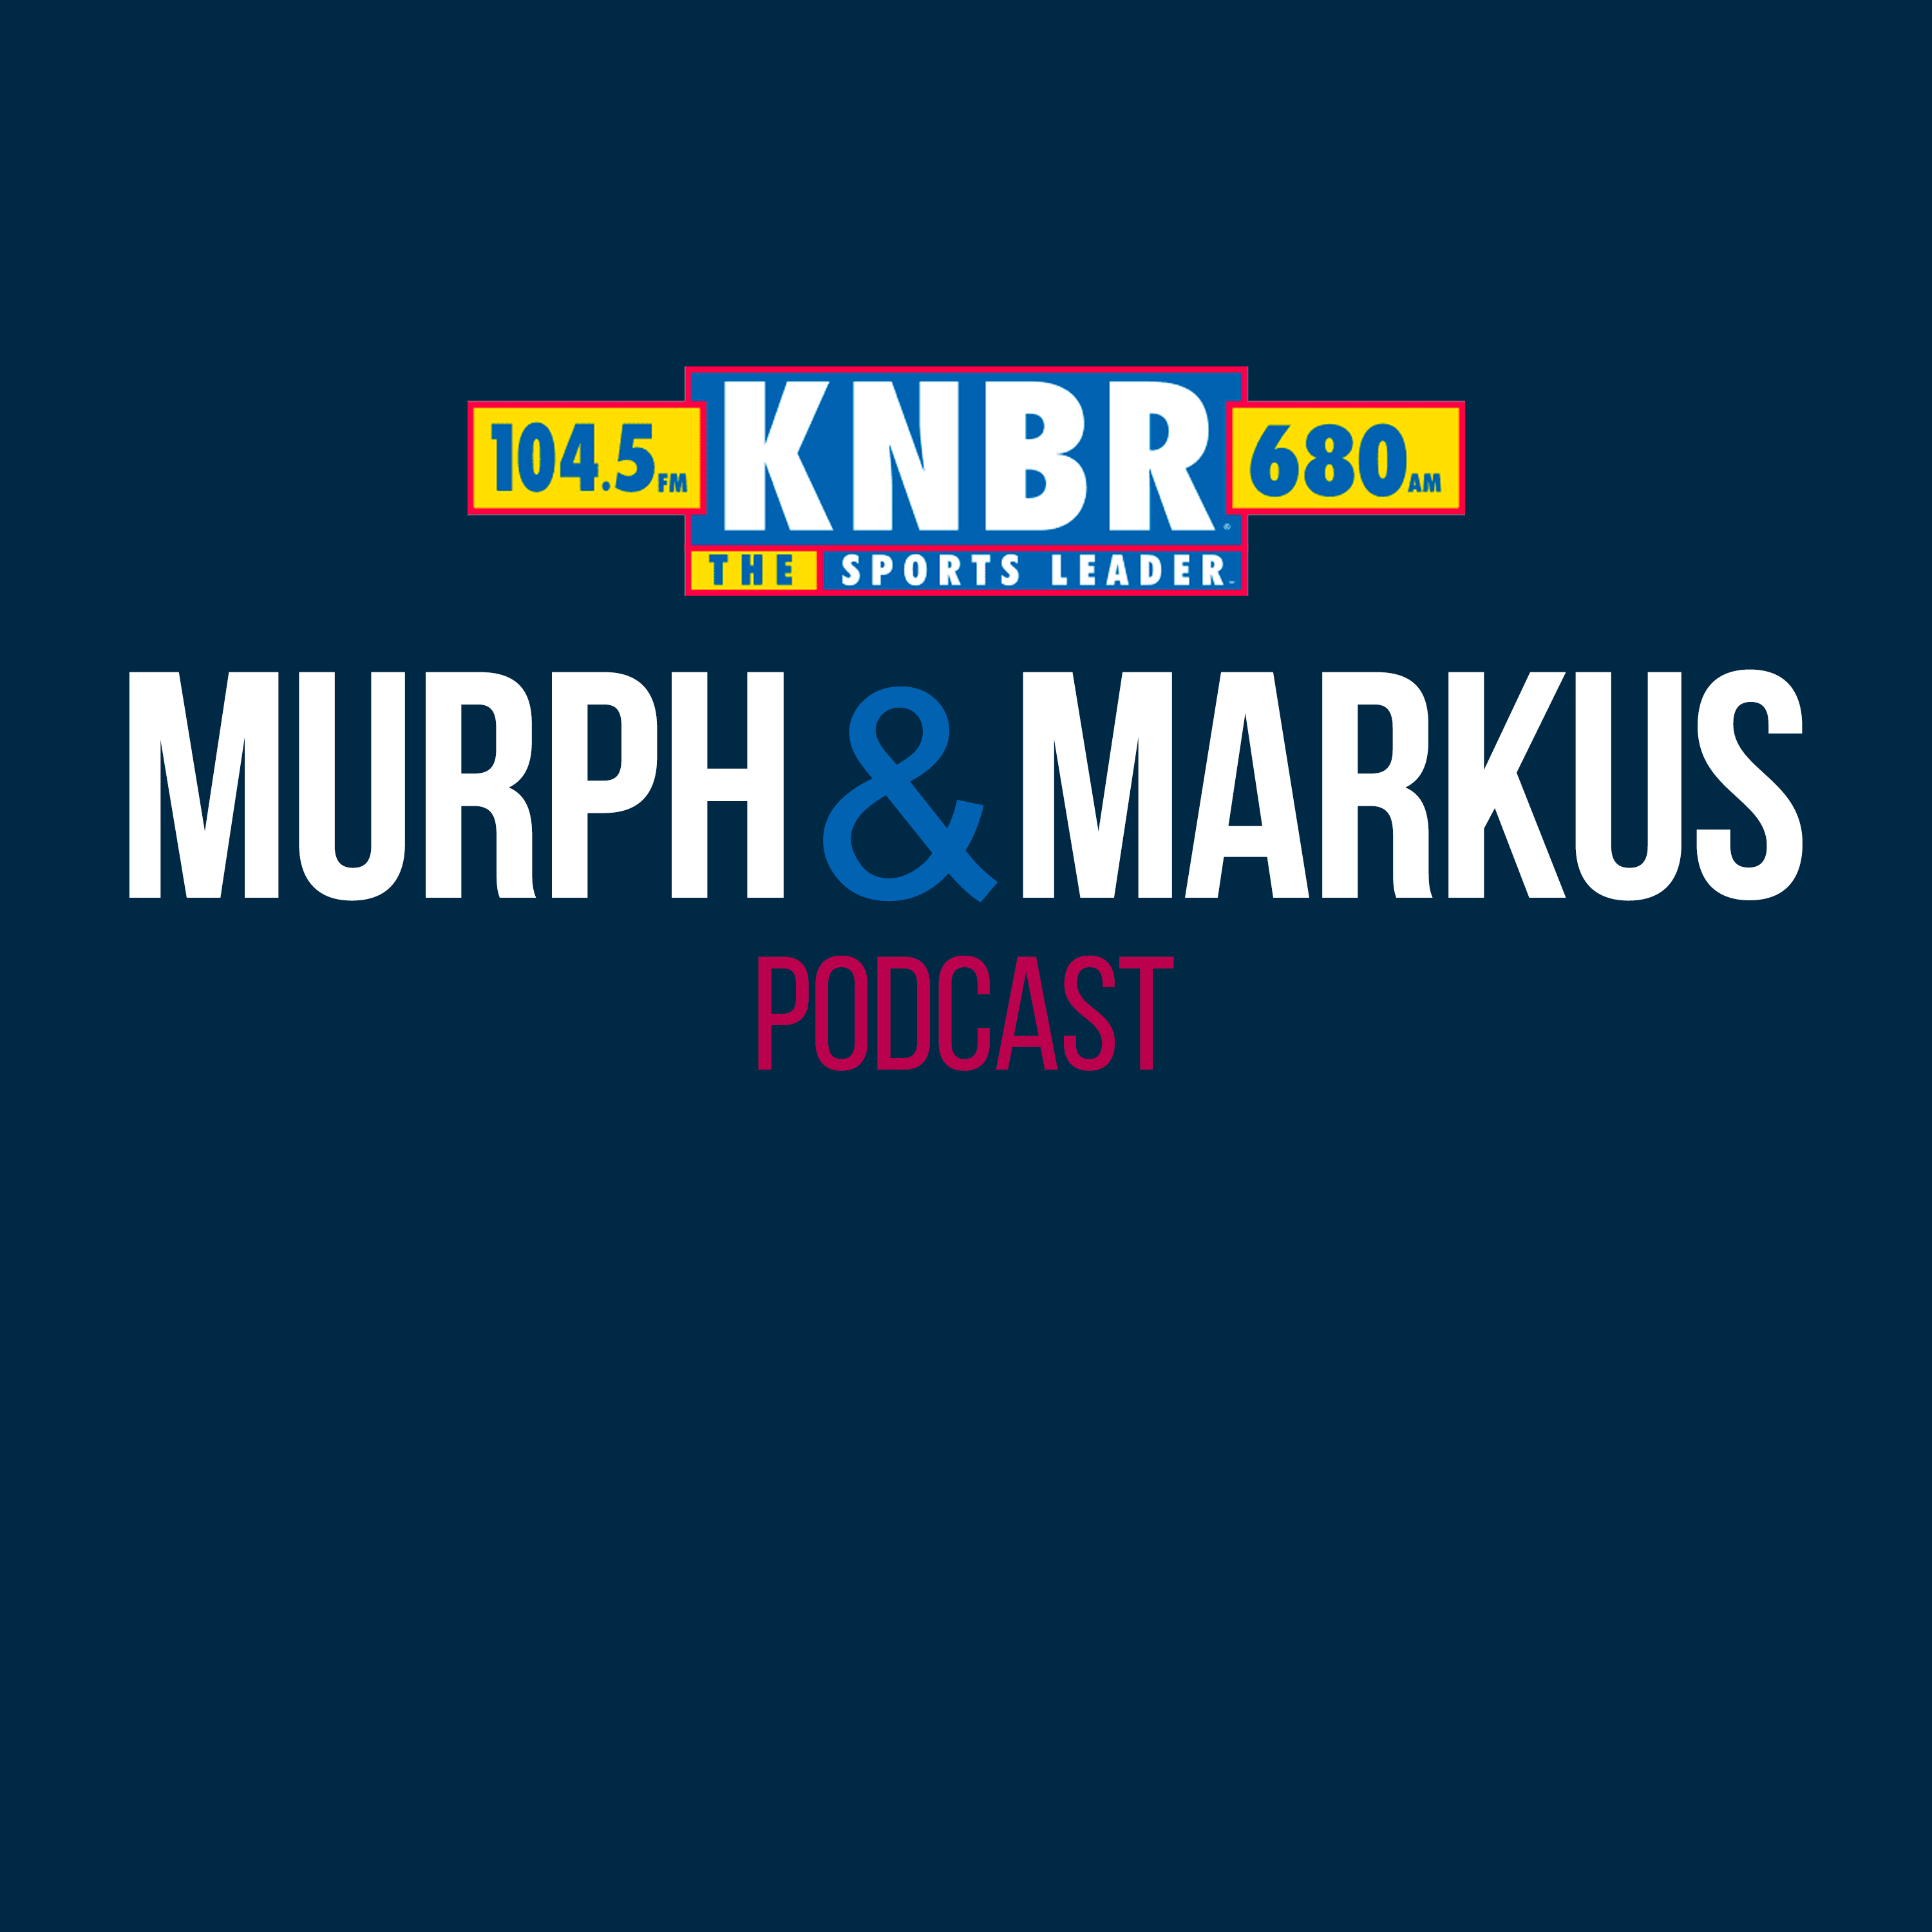 8-1 Hour 3: Murph & Markus debate if the Giants can make the playoffs with their current roster, dive into the Cooler of Content, and talk to Matt Maiocco